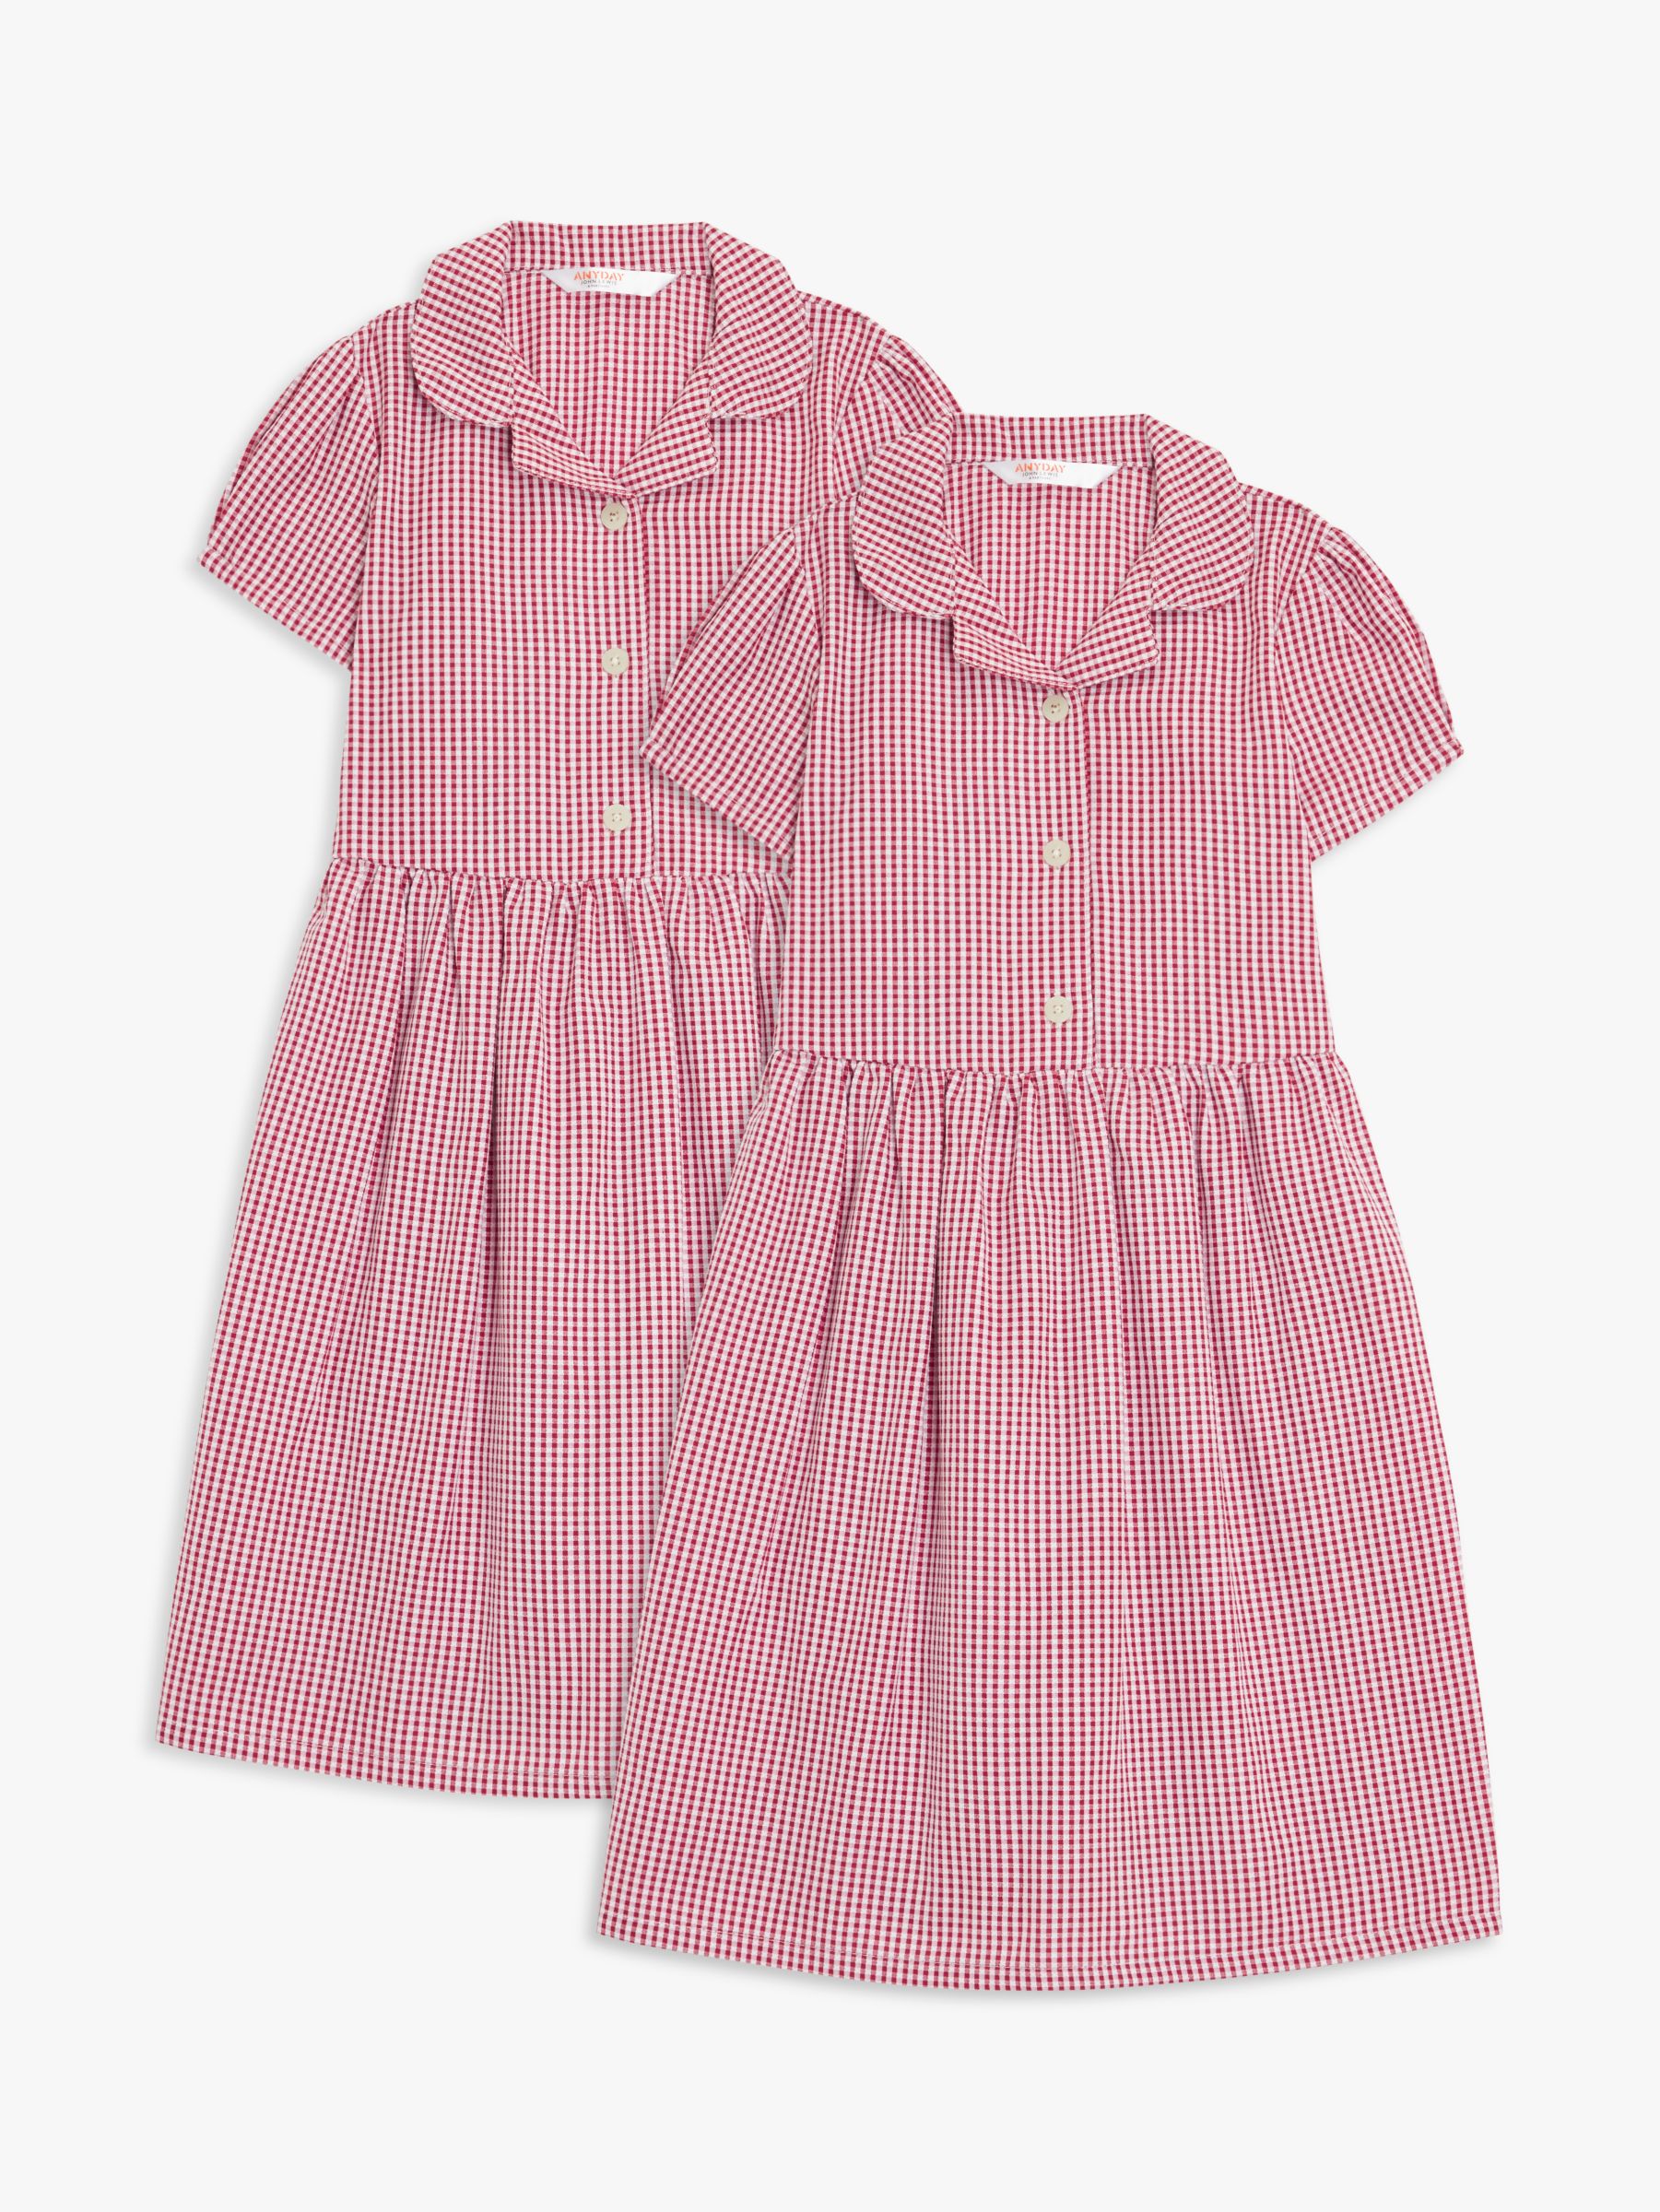 John Lewis ANYDAY Kids' Gingham School Summer Dress, Pack of 2, Mid Red ...